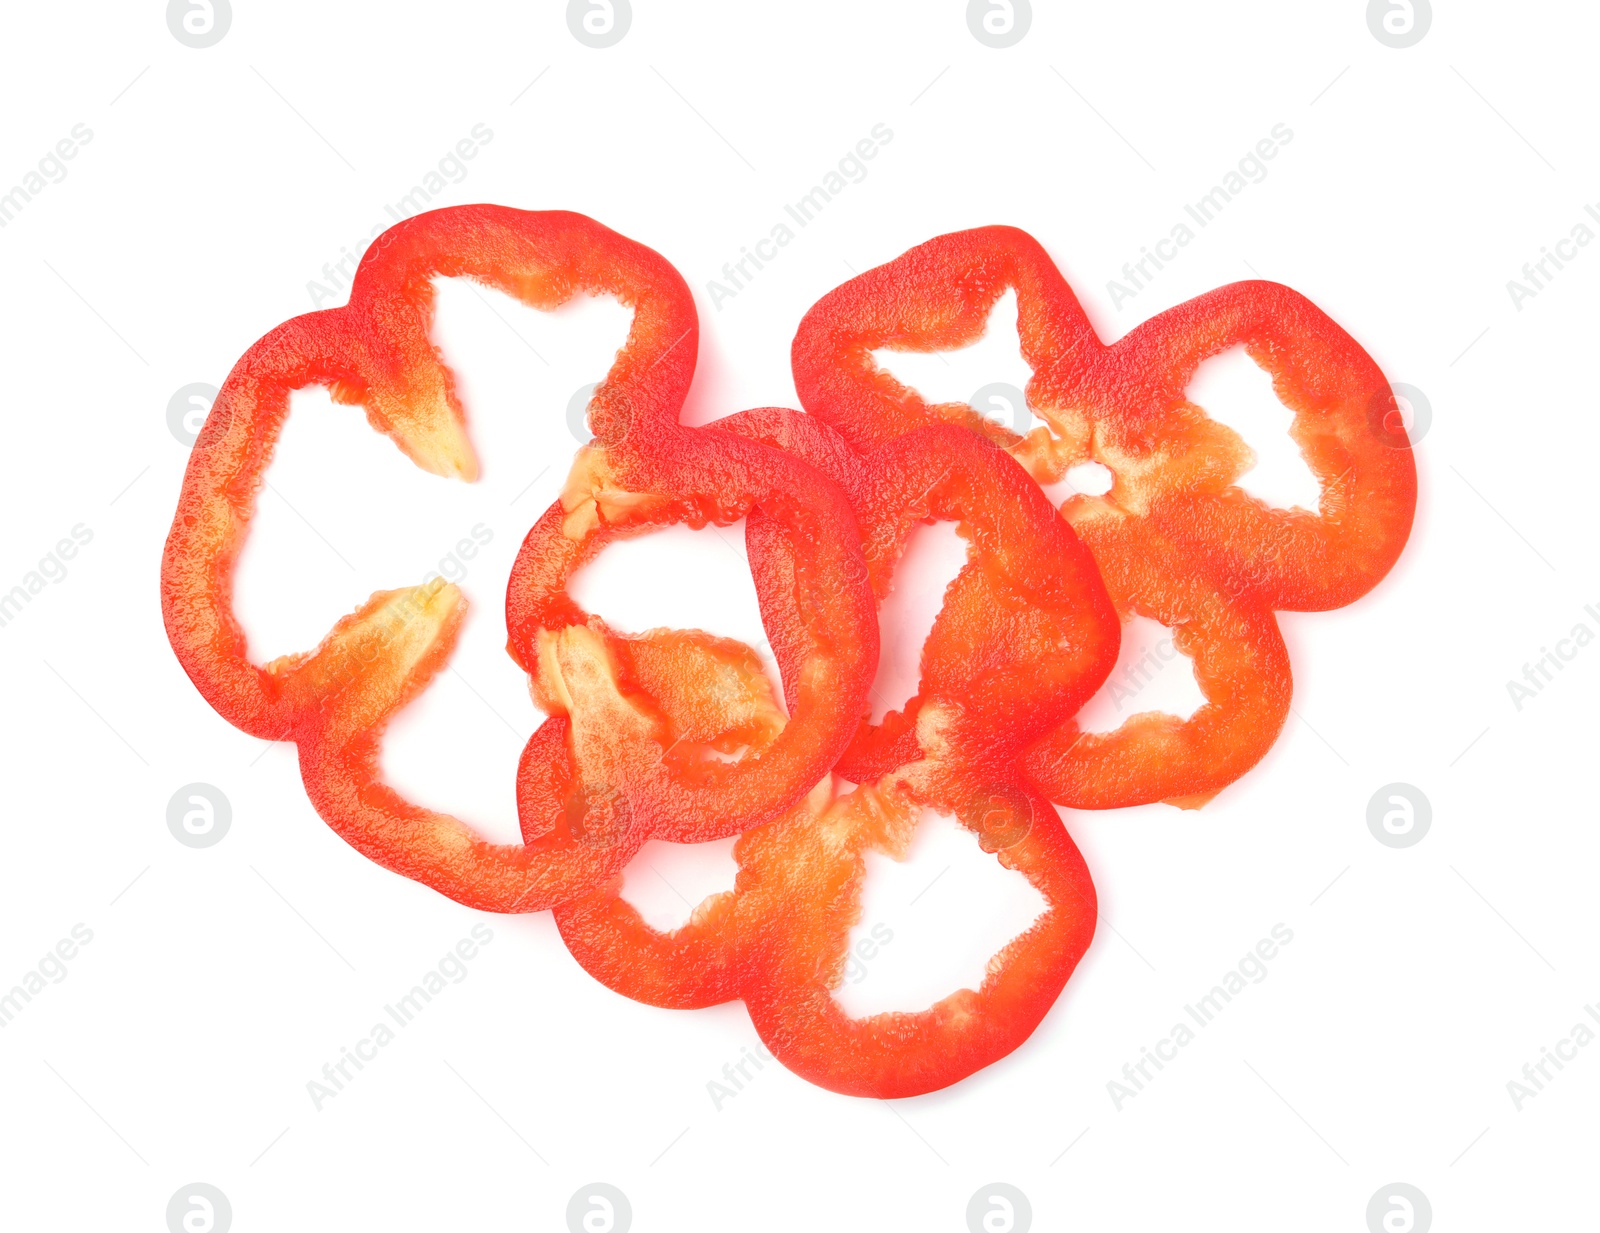 Photo of Slices of red bell pepper on white background, top view